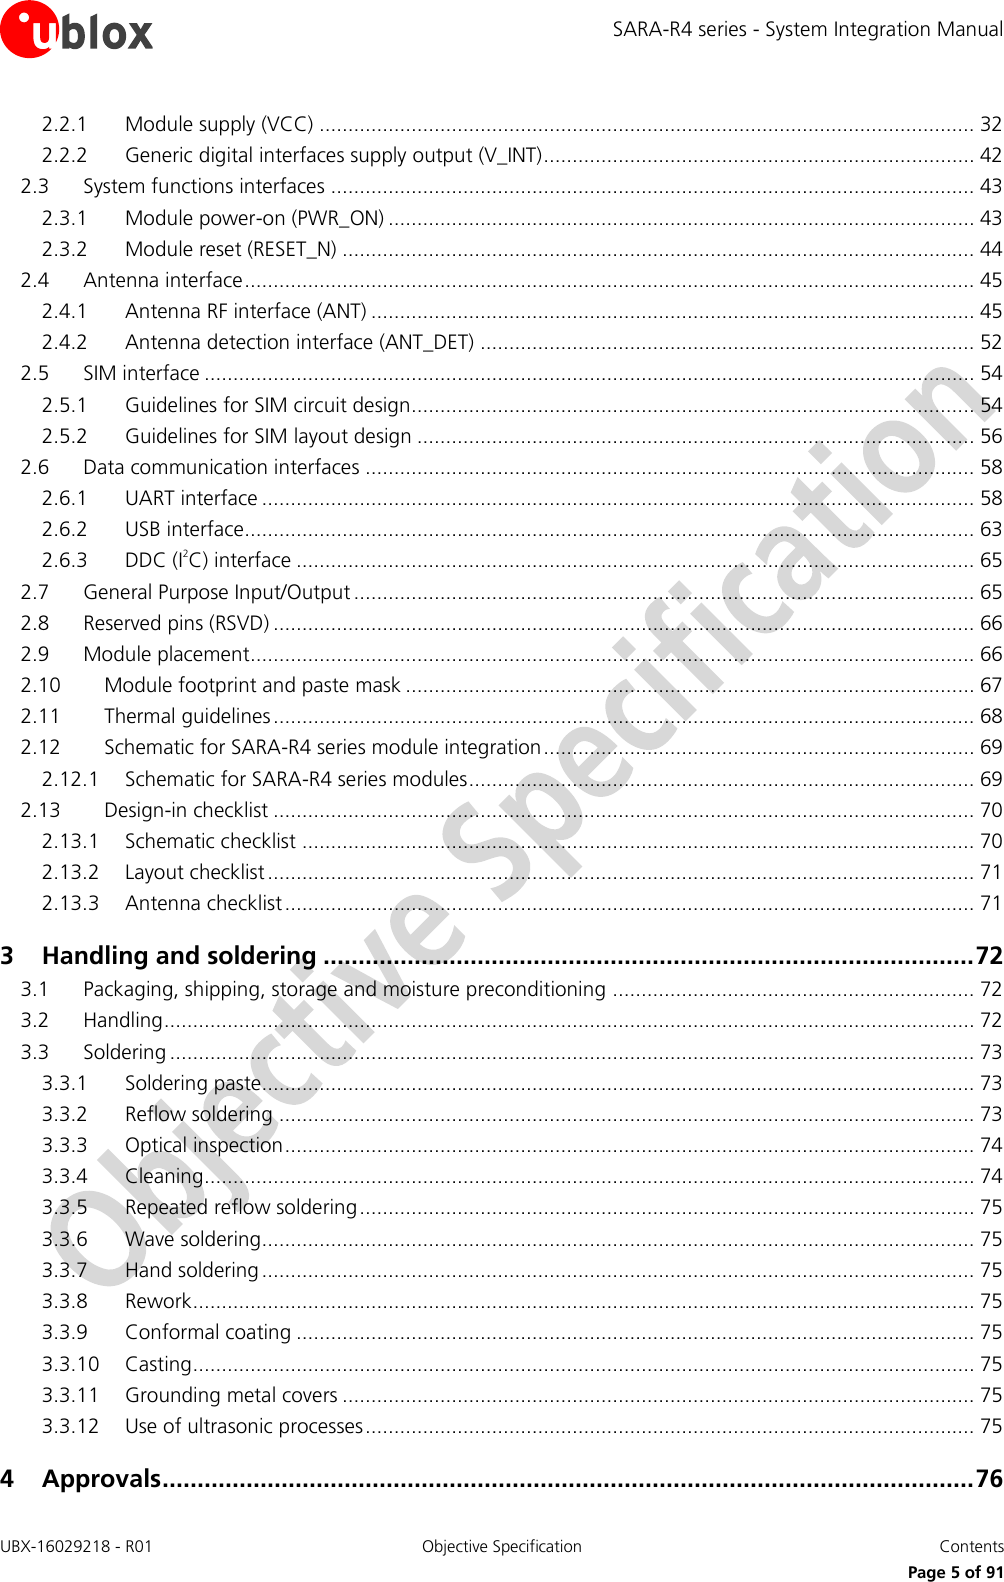 SARA-R4 series - System Integration Manual UBX-16029218 - R01  Objective Specification  Contents     Page 5 of 91 2.2.1 Module supply (VCC) .................................................................................................................. 32 2.2.2 Generic digital interfaces supply output (V_INT) ........................................................................... 42 2.3 System functions interfaces ................................................................................................................ 43 2.3.1 Module power-on (PWR_ON) ...................................................................................................... 43 2.3.2 Module reset (RESET_N) .............................................................................................................. 44 2.4 Antenna interface ............................................................................................................................... 45 2.4.1 Antenna RF interface (ANT) ......................................................................................................... 45 2.4.2 Antenna detection interface (ANT_DET) ...................................................................................... 52 2.5 SIM interface ...................................................................................................................................... 54 2.5.1 Guidelines for SIM circuit design.................................................................................................. 54 2.5.2 Guidelines for SIM layout design ................................................................................................. 56 2.6 Data communication interfaces .......................................................................................................... 58 2.6.1 UART interface ............................................................................................................................ 58 2.6.2 USB interface............................................................................................................................... 63 2.6.3 DDC (I2C) interface ...................................................................................................................... 65 2.7 General Purpose Input/Output ............................................................................................................ 65 2.8 Reserved pins (RSVD) .......................................................................................................................... 66 2.9 Module placement.............................................................................................................................. 66 2.10 Module footprint and paste mask ................................................................................................... 67 2.11 Thermal guidelines .......................................................................................................................... 68 2.12 Schematic for SARA-R4 series module integration ........................................................................... 69 2.12.1 Schematic for SARA-R4 series modules ........................................................................................ 69 2.13 Design-in checklist .......................................................................................................................... 70 2.13.1 Schematic checklist ..................................................................................................................... 70 2.13.2 Layout checklist ........................................................................................................................... 71 2.13.3 Antenna checklist ........................................................................................................................ 71 3 Handling and soldering ............................................................................................. 72 3.1 Packaging, shipping, storage and moisture preconditioning ............................................................... 72 3.2 Handling ............................................................................................................................................. 72 3.3 Soldering ............................................................................................................................................ 73 3.3.1 Soldering paste............................................................................................................................ 73 3.3.2 Reflow soldering ......................................................................................................................... 73 3.3.3 Optical inspection ........................................................................................................................ 74 3.3.4 Cleaning ...................................................................................................................................... 74 3.3.5 Repeated reflow soldering ........................................................................................................... 75 3.3.6 Wave soldering............................................................................................................................ 75 3.3.7 Hand soldering ............................................................................................................................ 75 3.3.8 Rework ........................................................................................................................................ 75 3.3.9 Conformal coating ...................................................................................................................... 75 3.3.10 Casting ........................................................................................................................................ 75 3.3.11 Grounding metal covers .............................................................................................................. 75 3.3.12 Use of ultrasonic processes .......................................................................................................... 75 4 Approvals .................................................................................................................... 76 